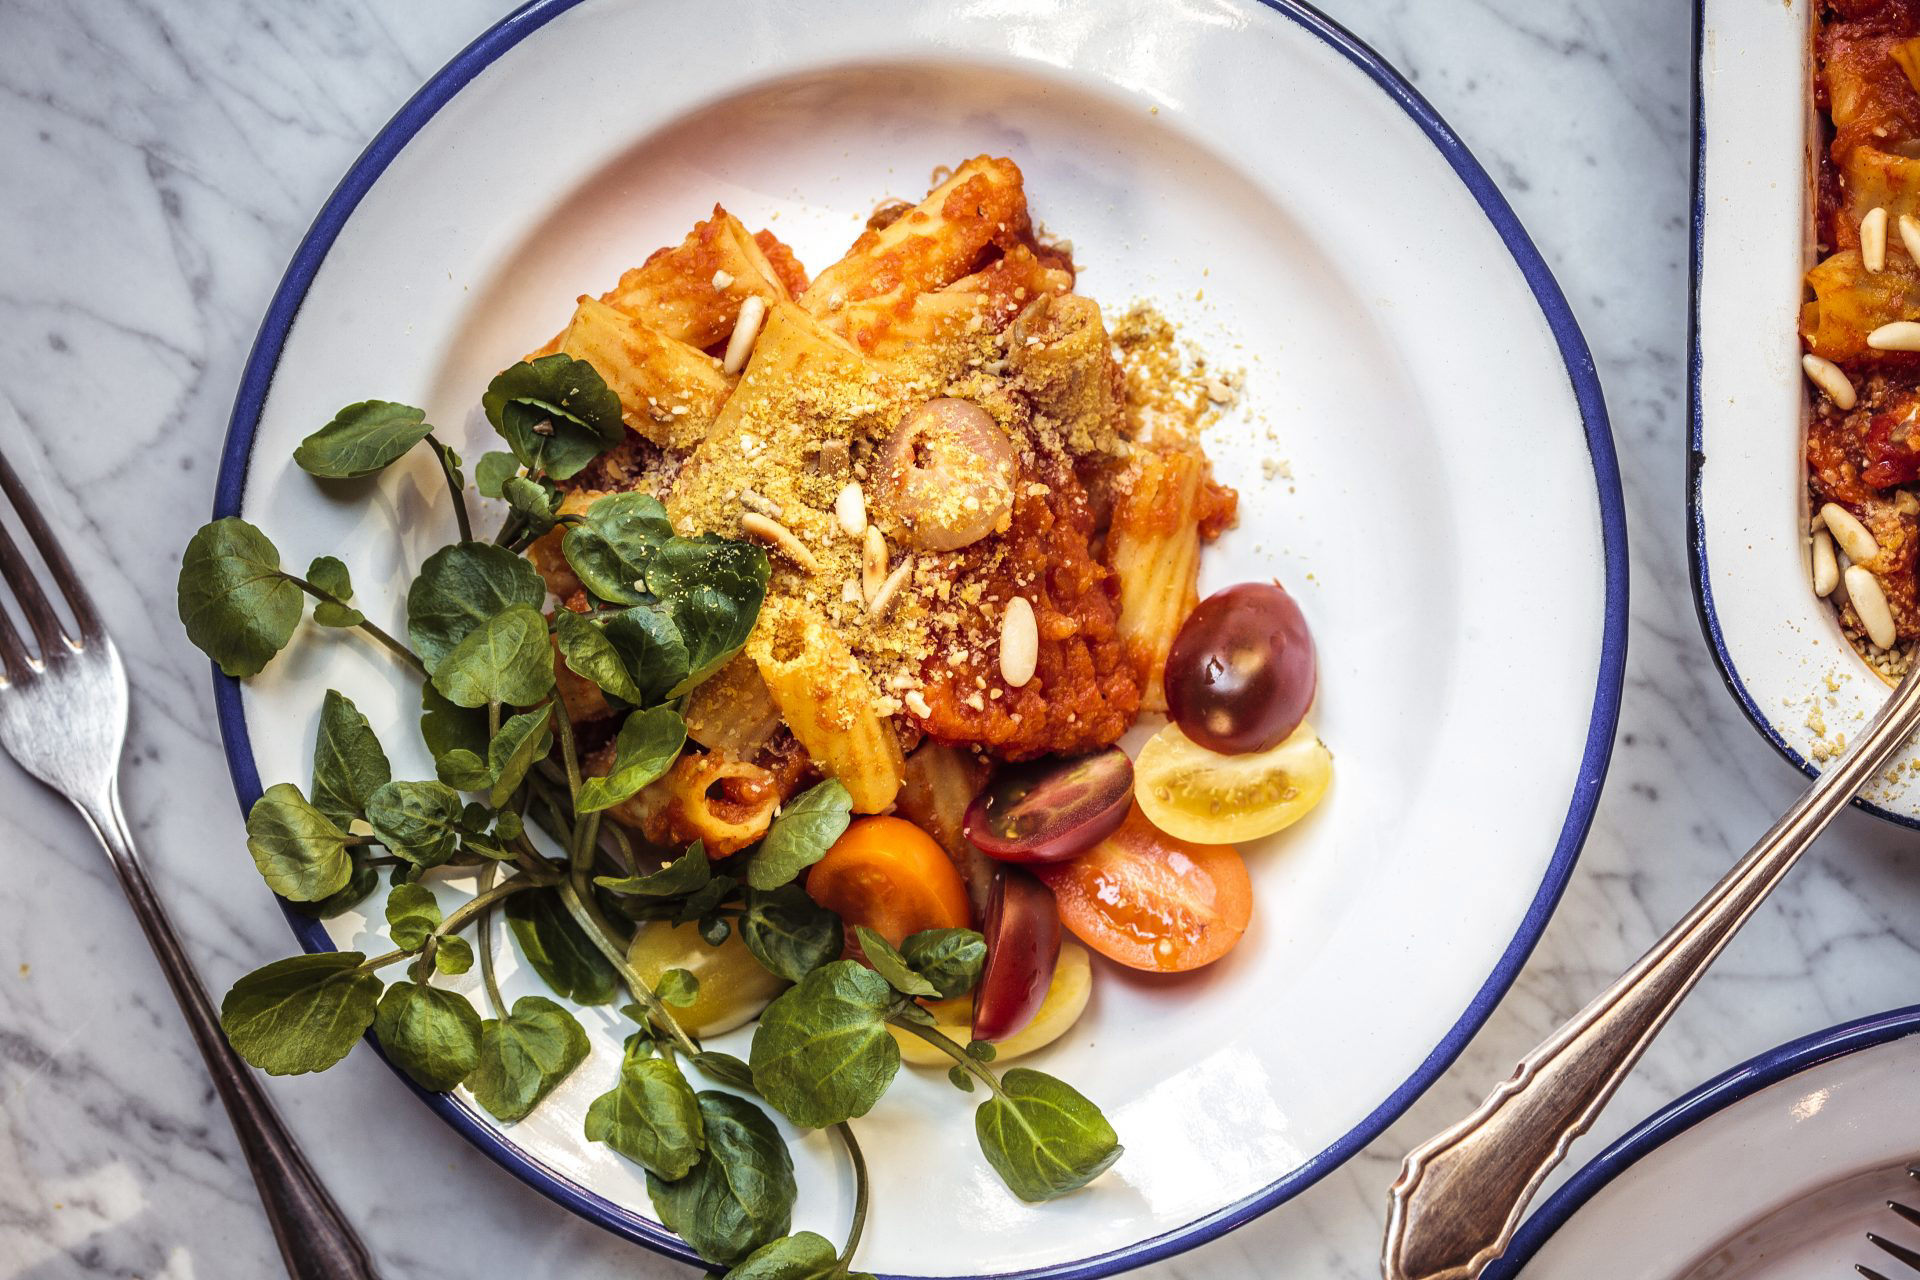 Recipes for vegetarian pastas that boost your energy